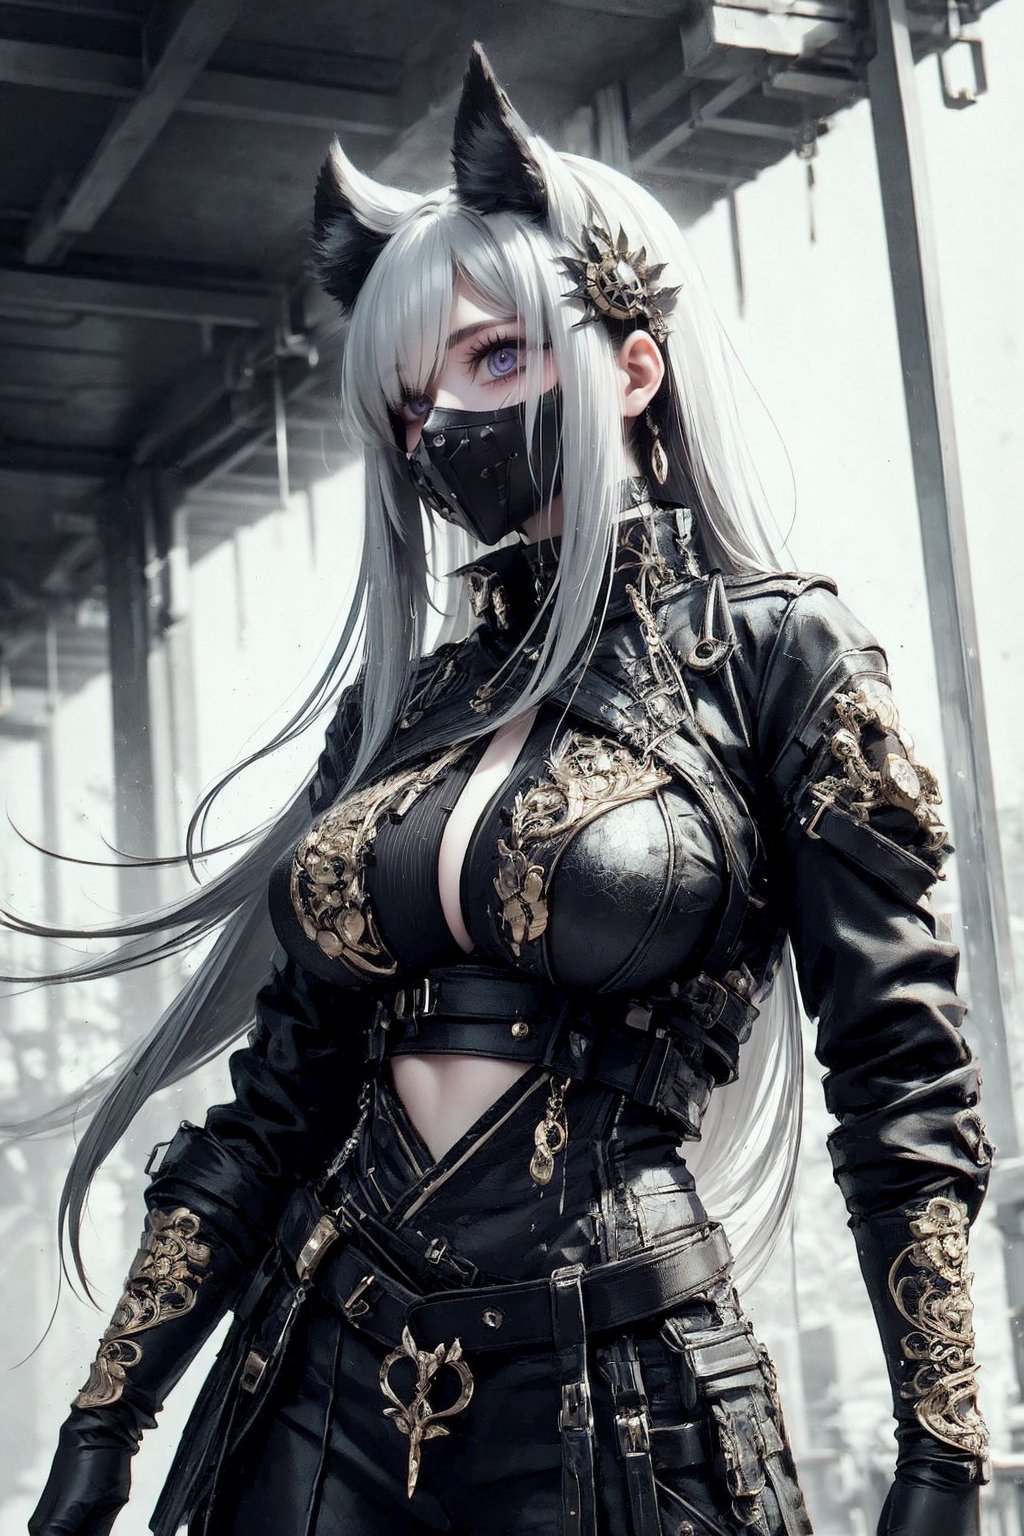 kitsune female, delicate physique, soft white fur, partial silver mask, gold eyes, intricate and ornate garments, cyberpunk
